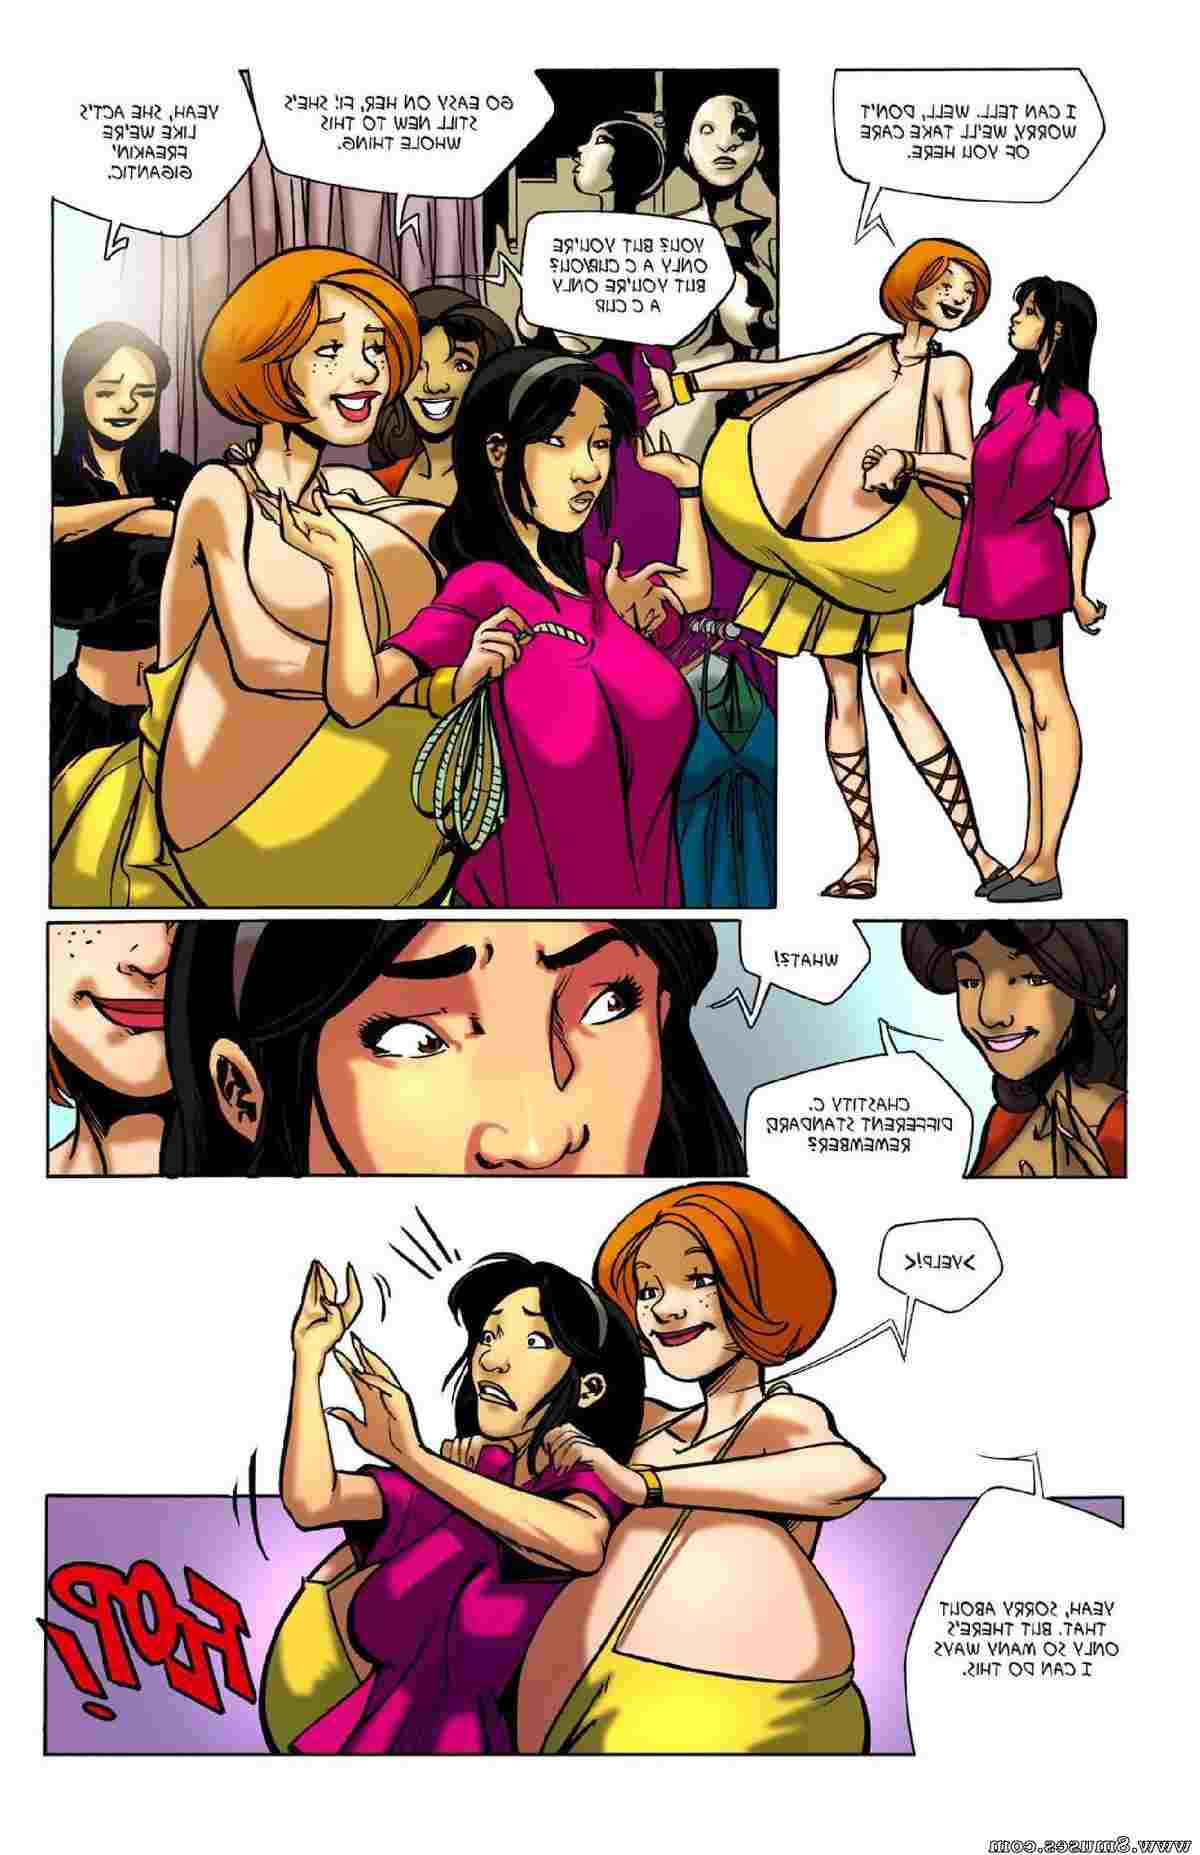 BE-Story-Club-Comics/Welcome-to-Chastity Welcome_to_Chastity__8muses_-_Sex_and_Porn_Comics_28.jpg